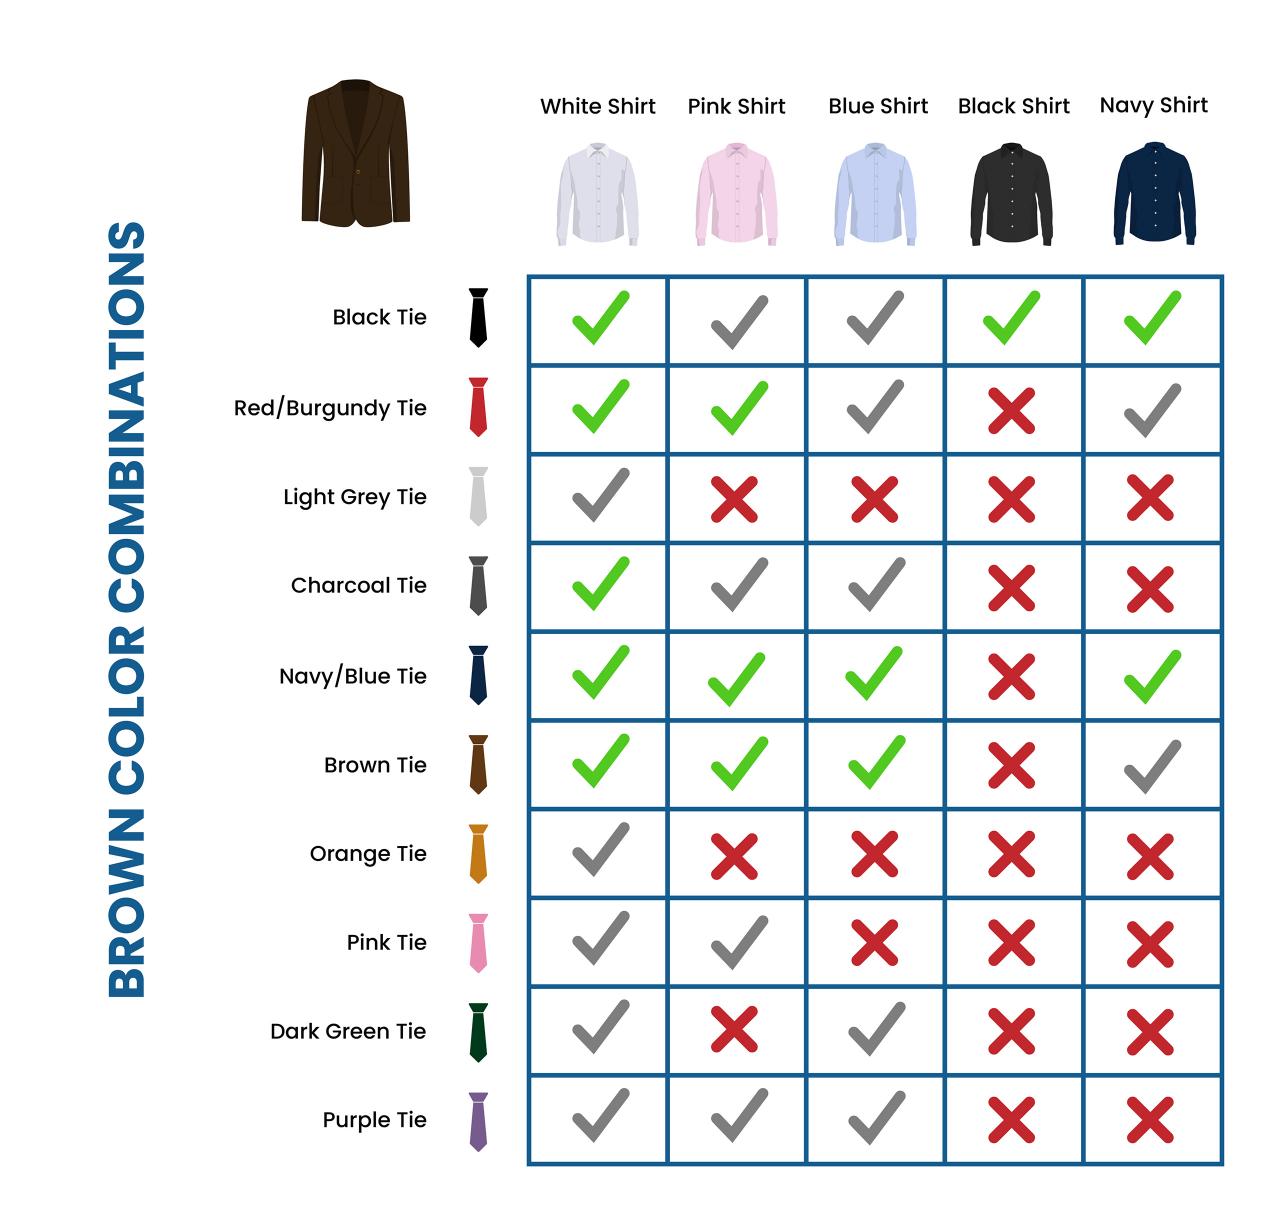 Best shirt and tie combinations for an interview